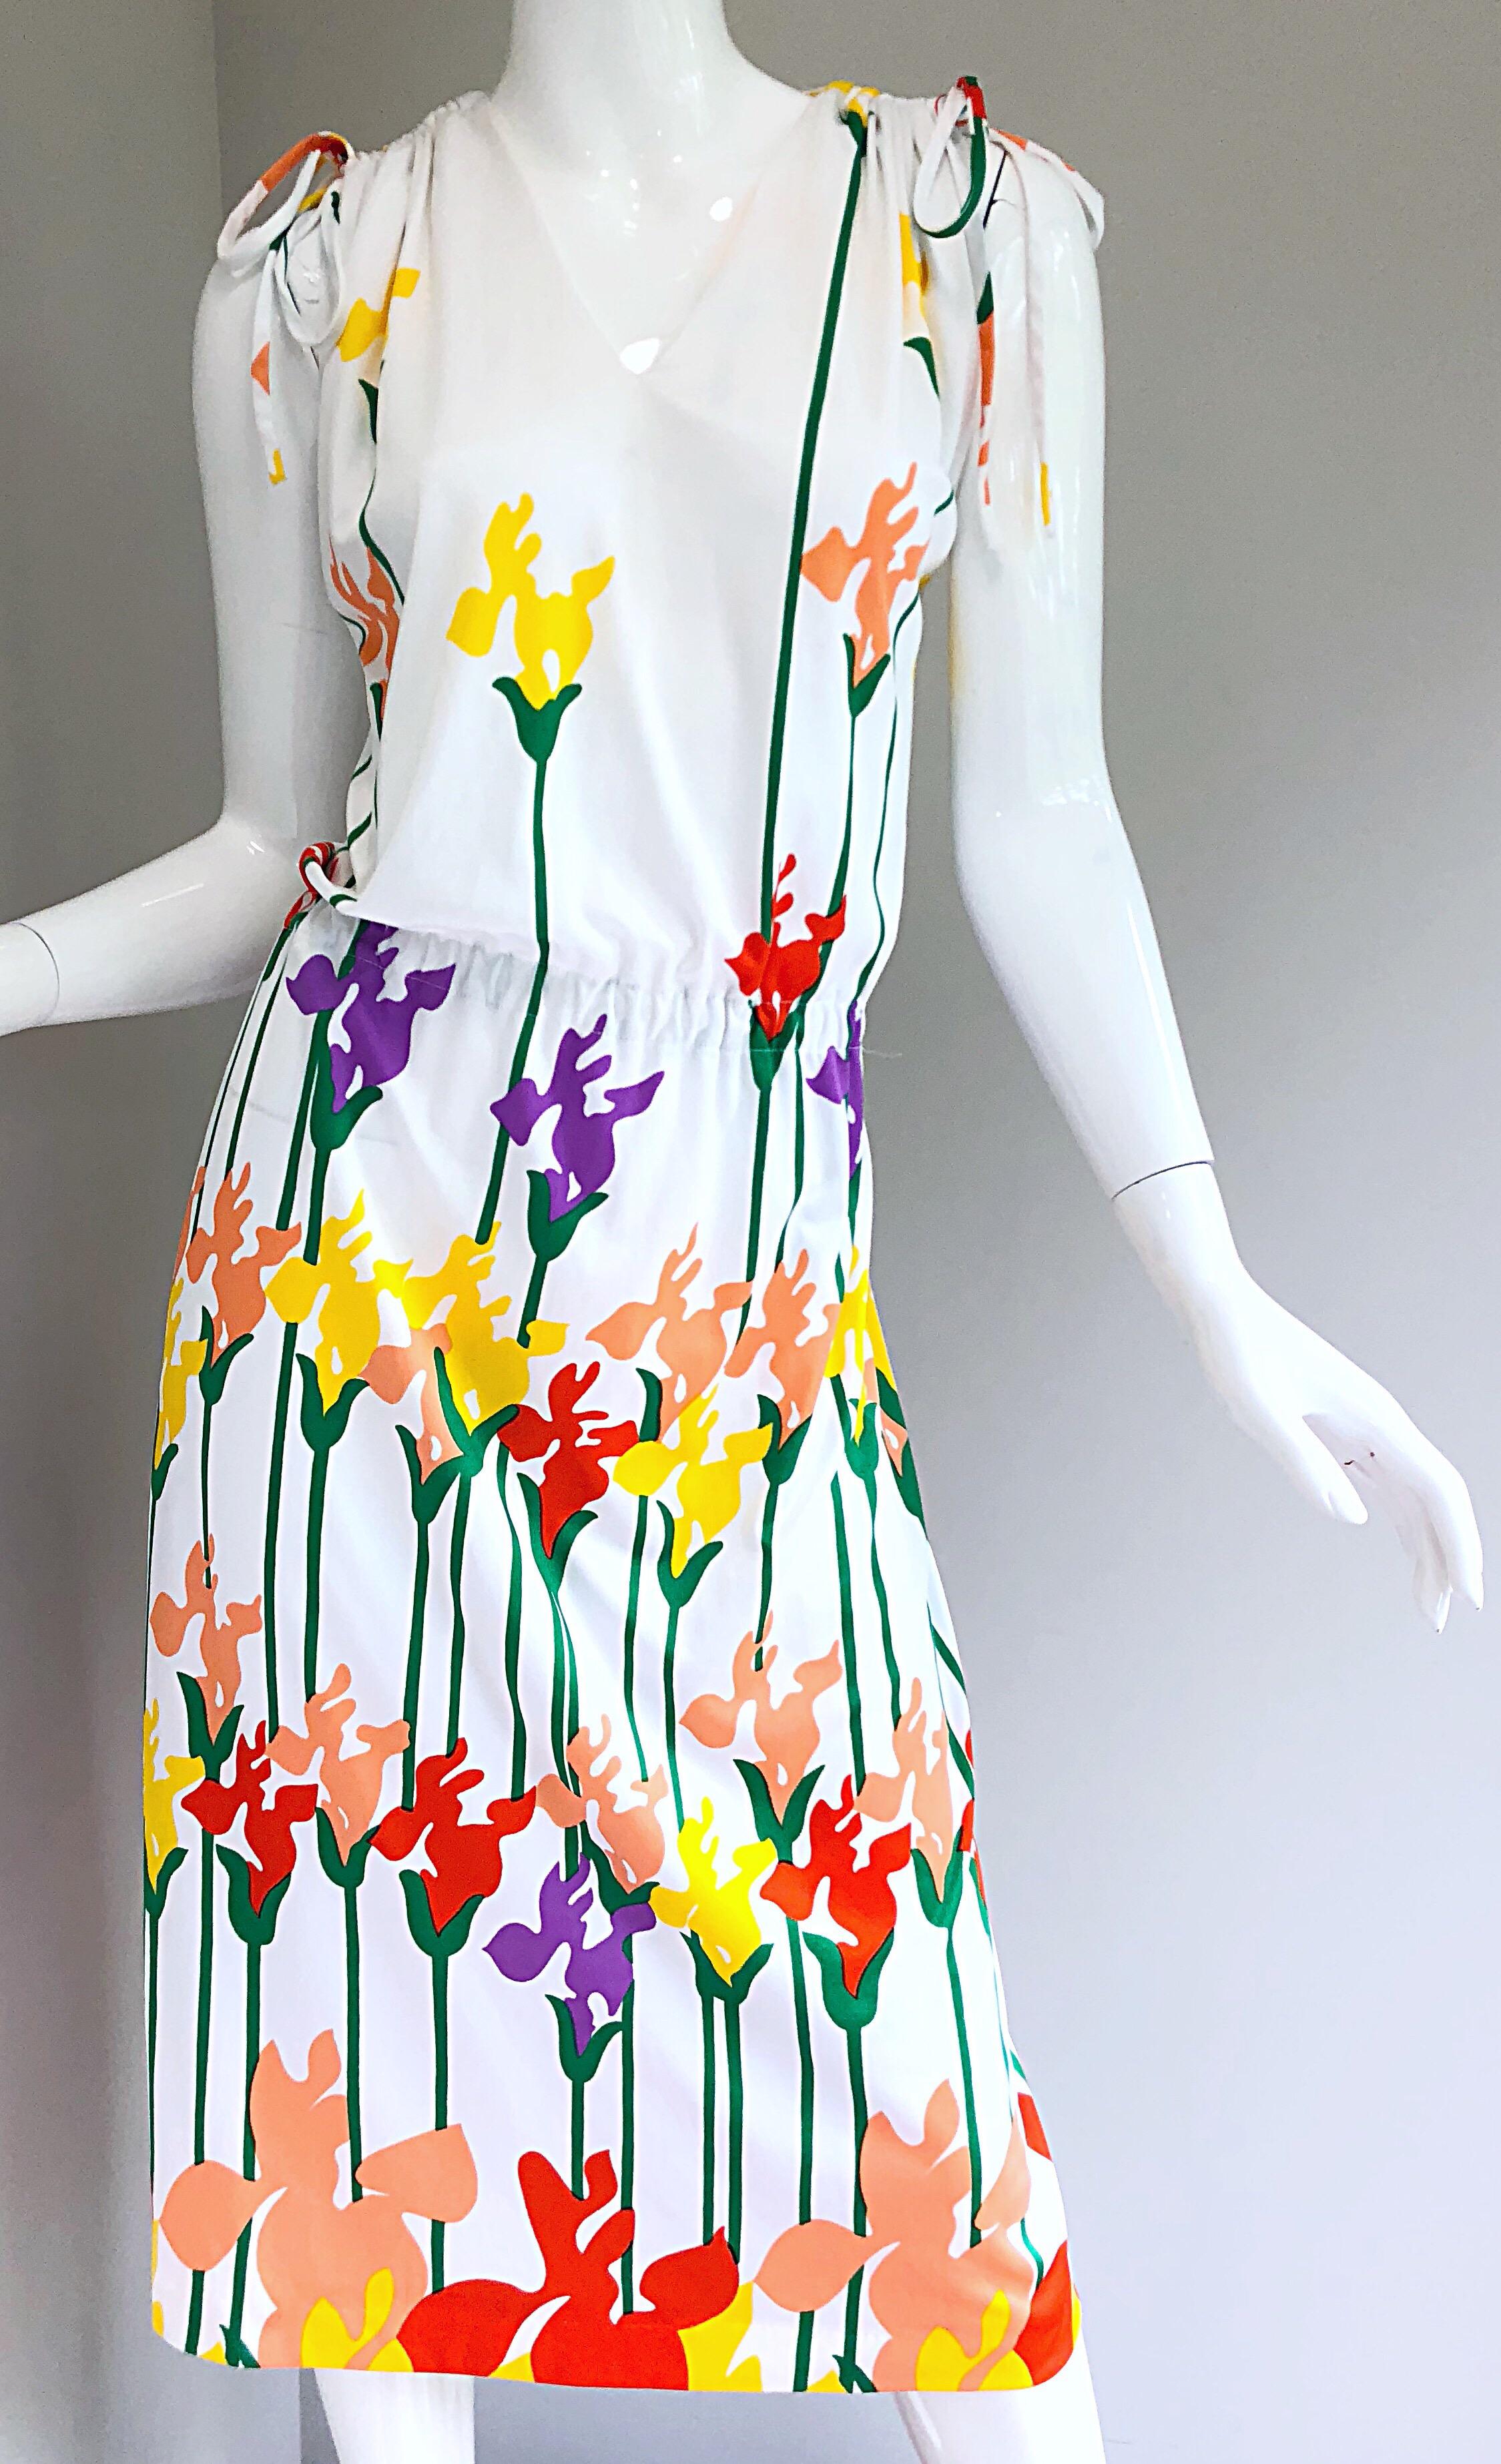 Lanvin Vintage 1970s Tulip Butterfly Print Colorful 70s Jersey Drawstring Dress For Sale 3